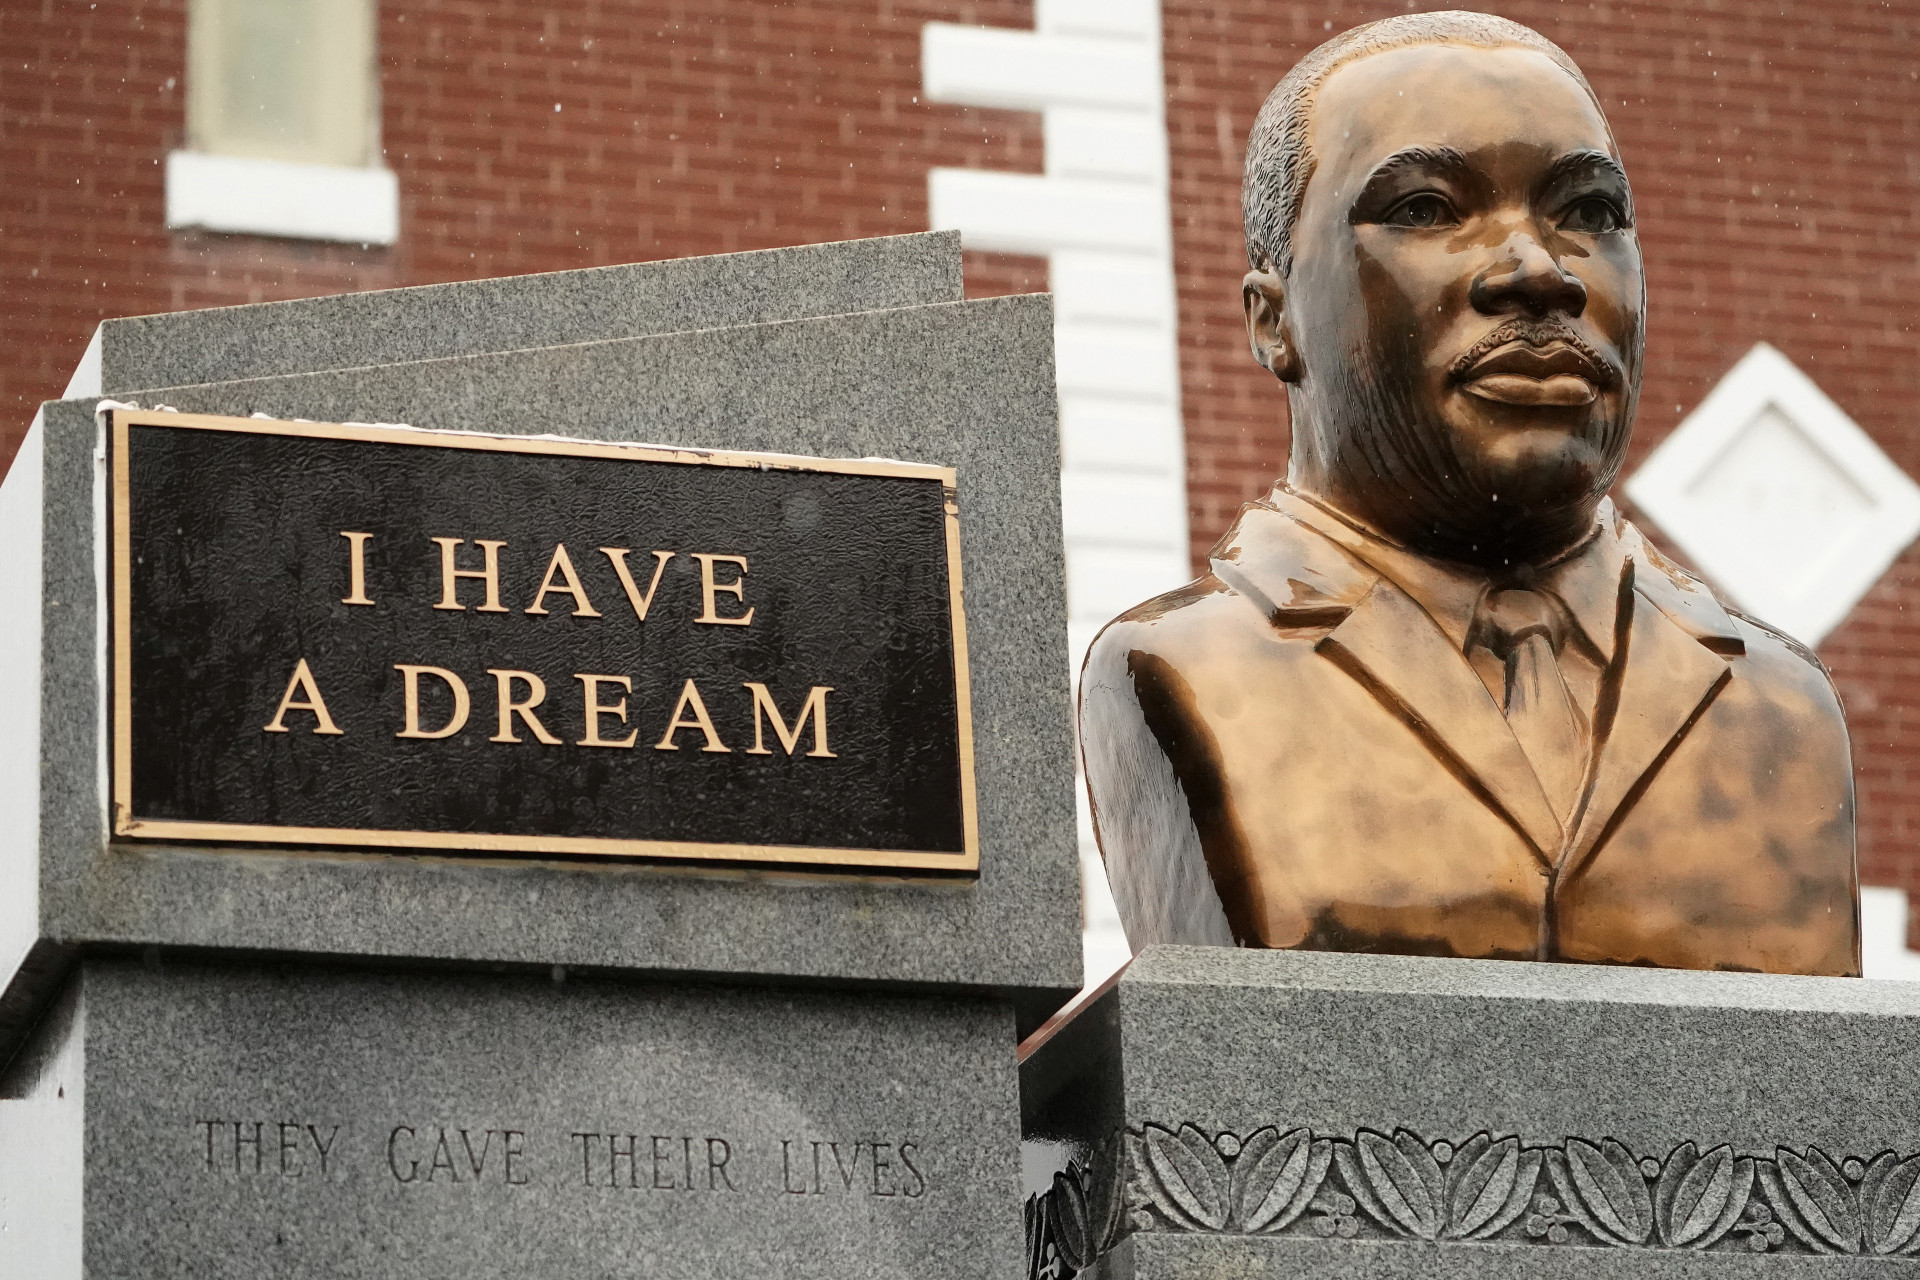 A bust of Martin Luther King Jr. is pictured in Selma, Alabama.<p>You may also like:<a href="https://www.starsinsider.com/n/434689?utm_source=msn.com&utm_medium=display&utm_campaign=referral_description&utm_content=347864v15en-us"> Things that can make your home a target for burglars</a></p>